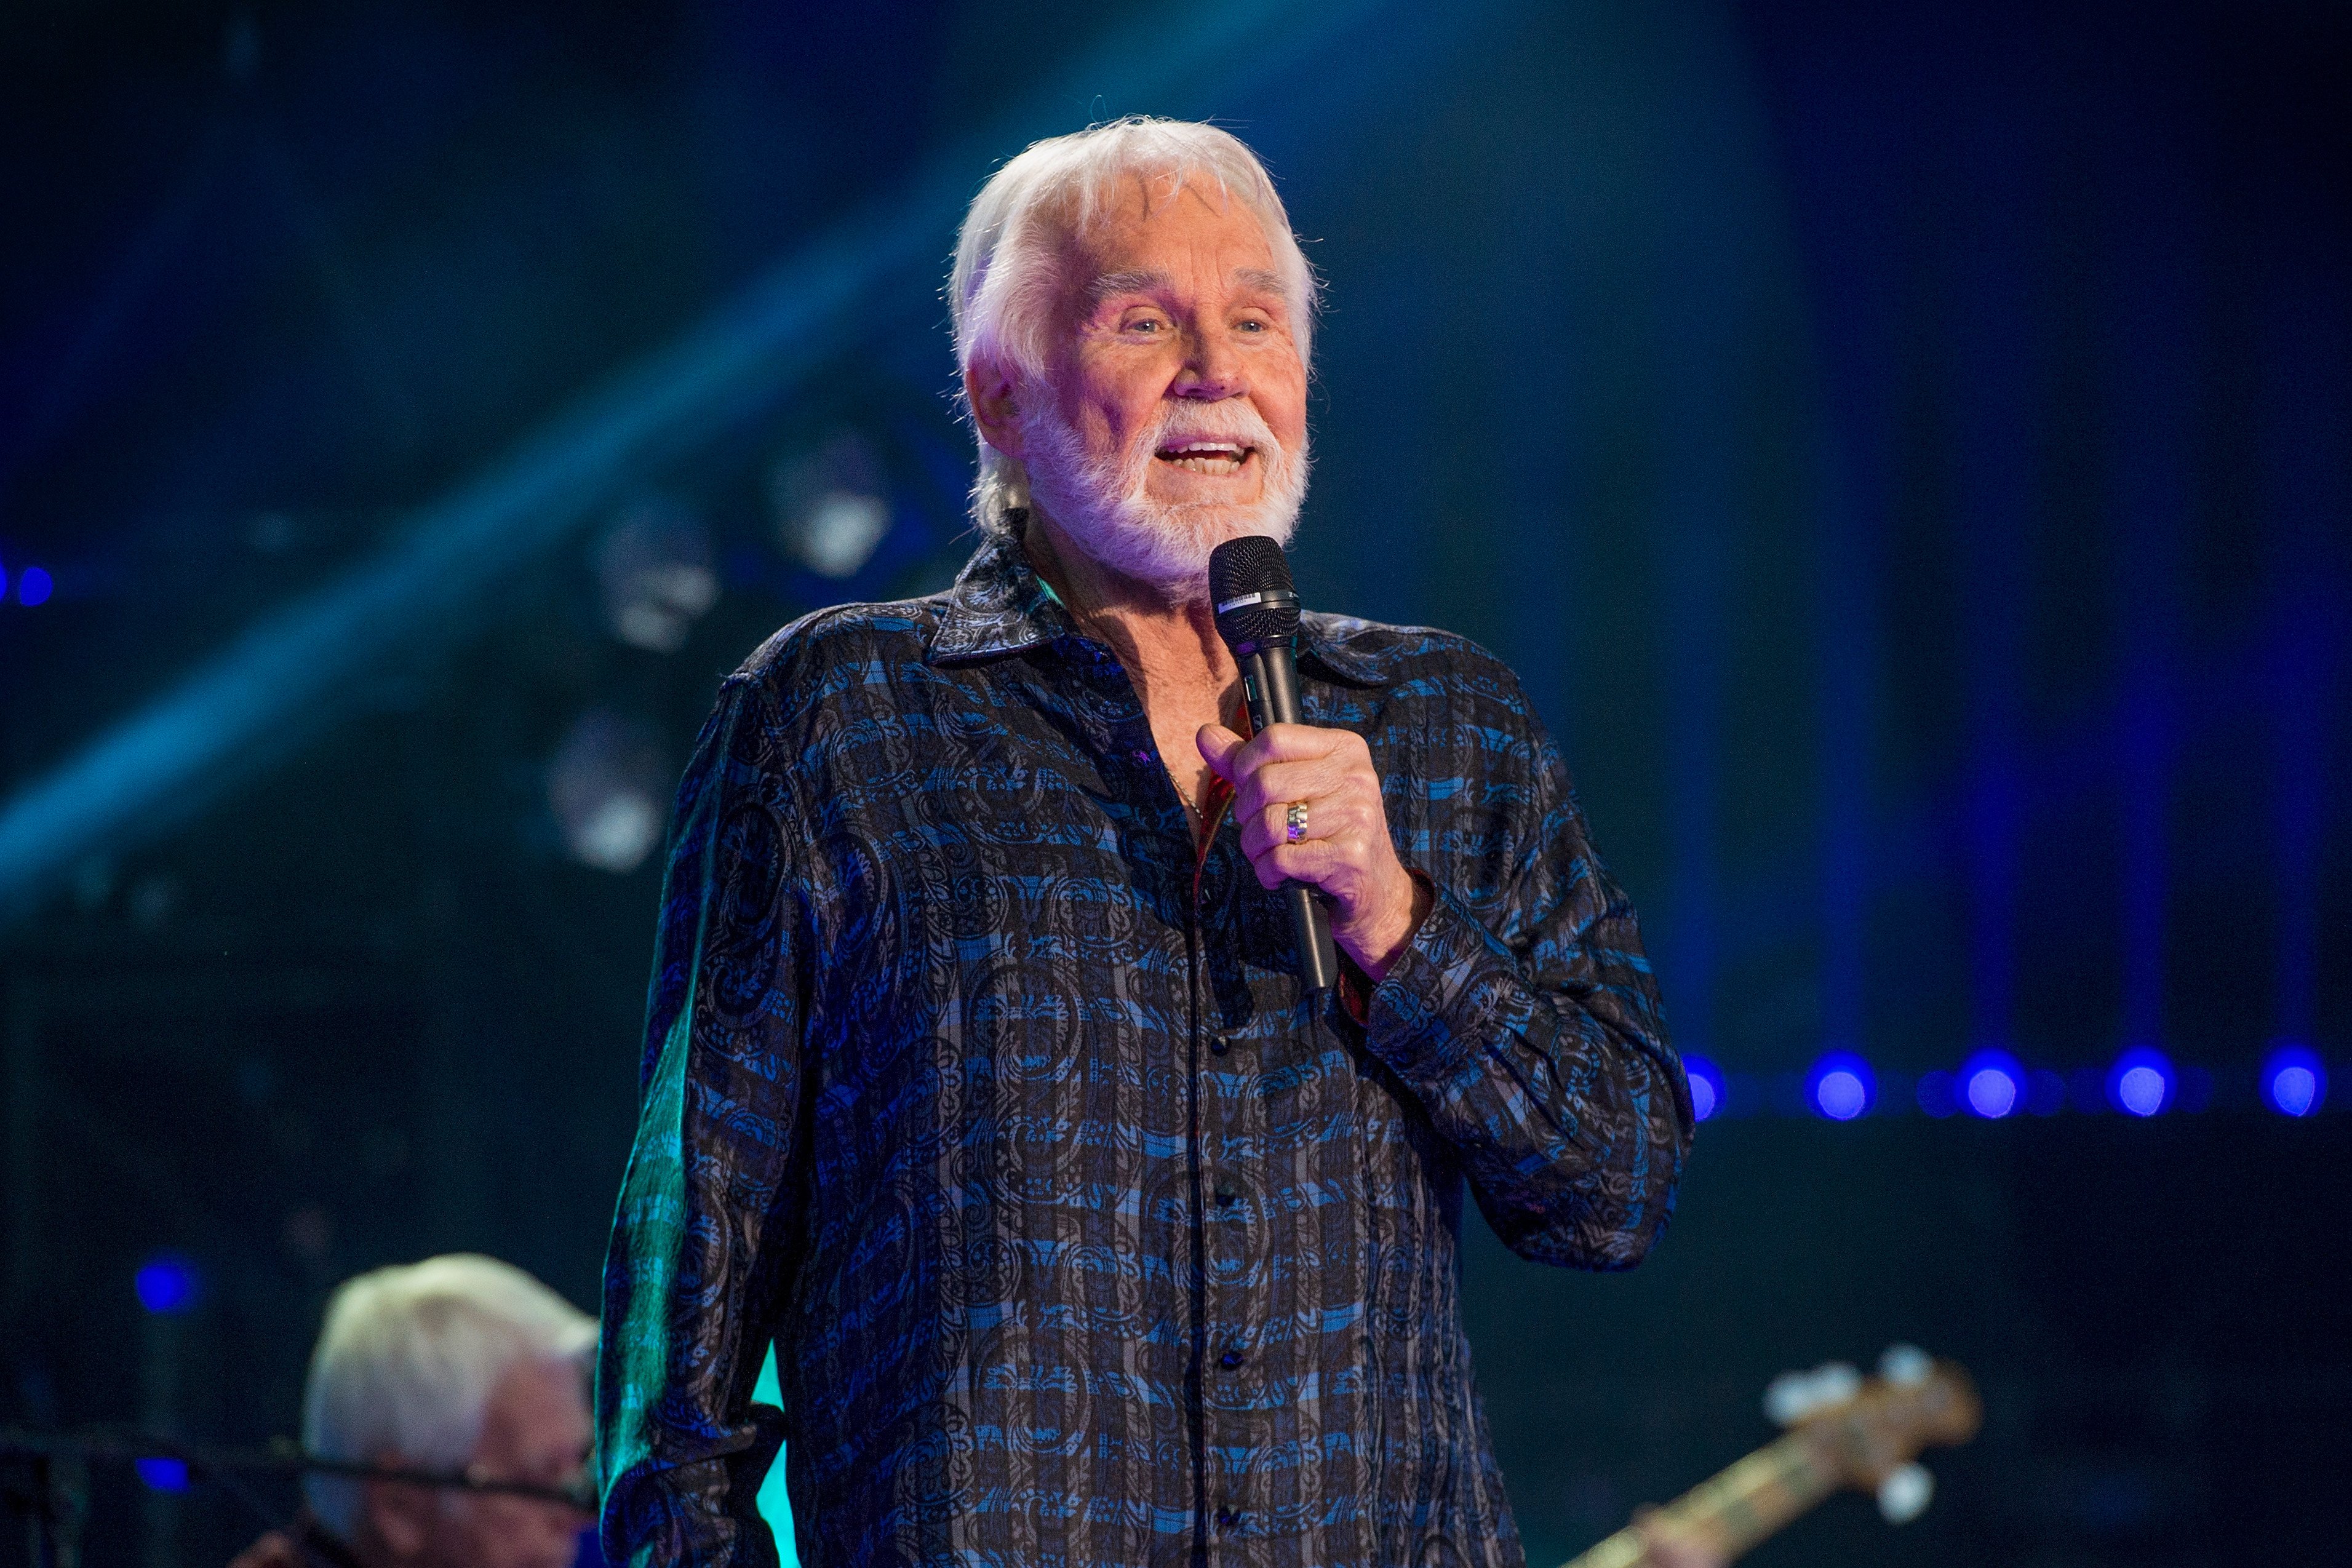 Country music singer Kenny Rogers performing during the 2017 CMA Music Festival on June 8, 2017 in Nashville, Tennessee | Source: Getty Images